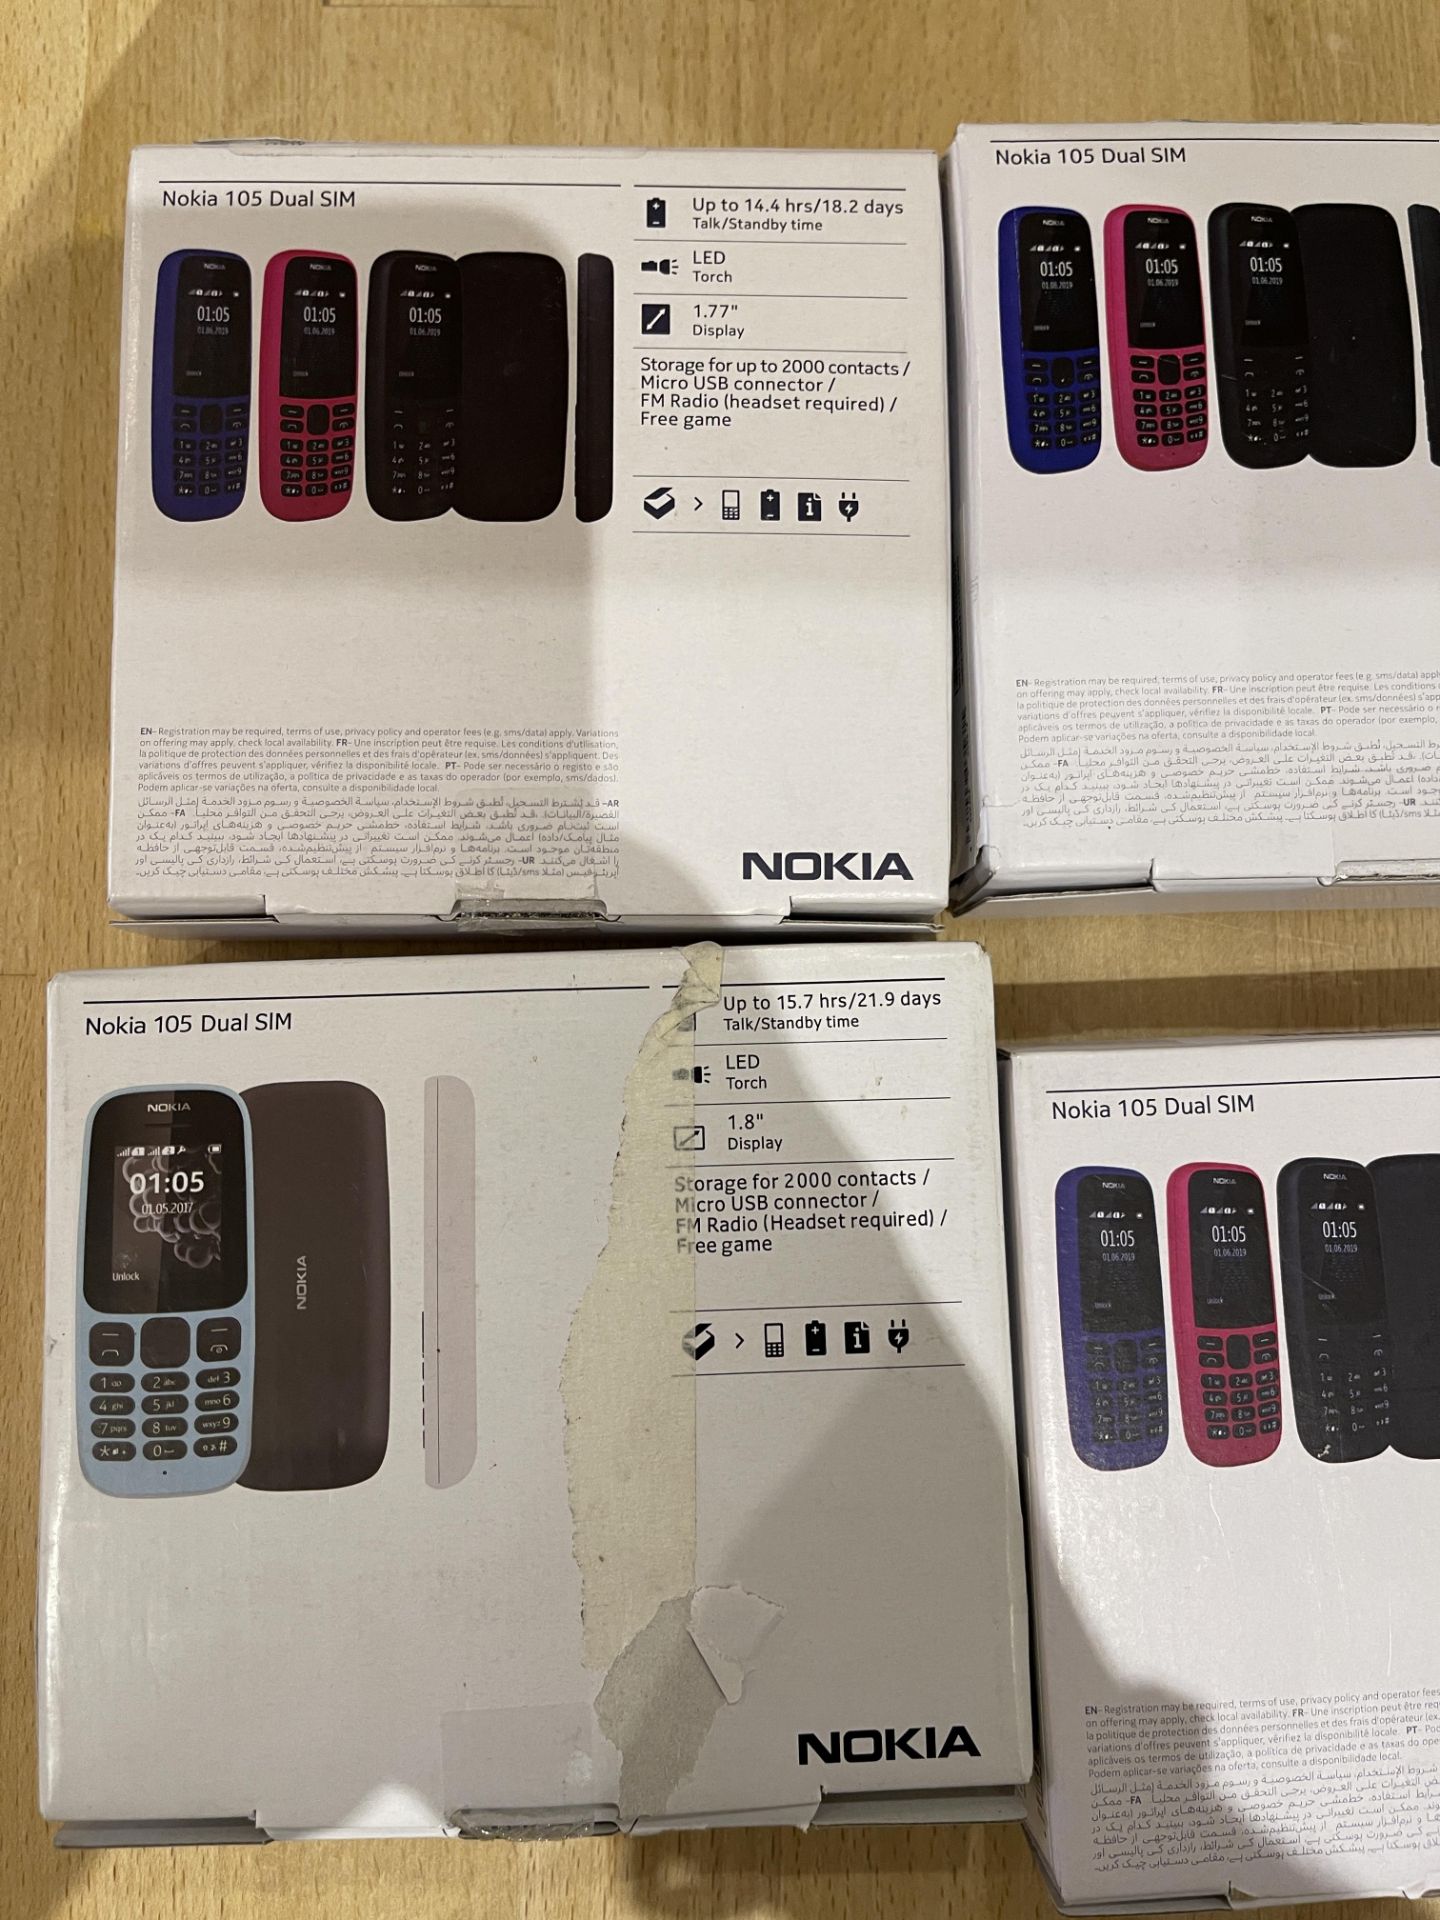 6: Nokia 105 Dual Sim Mobile Phones, Boxes Have Been Opened, Phone, Battery & Charger All Present - - Image 9 of 15